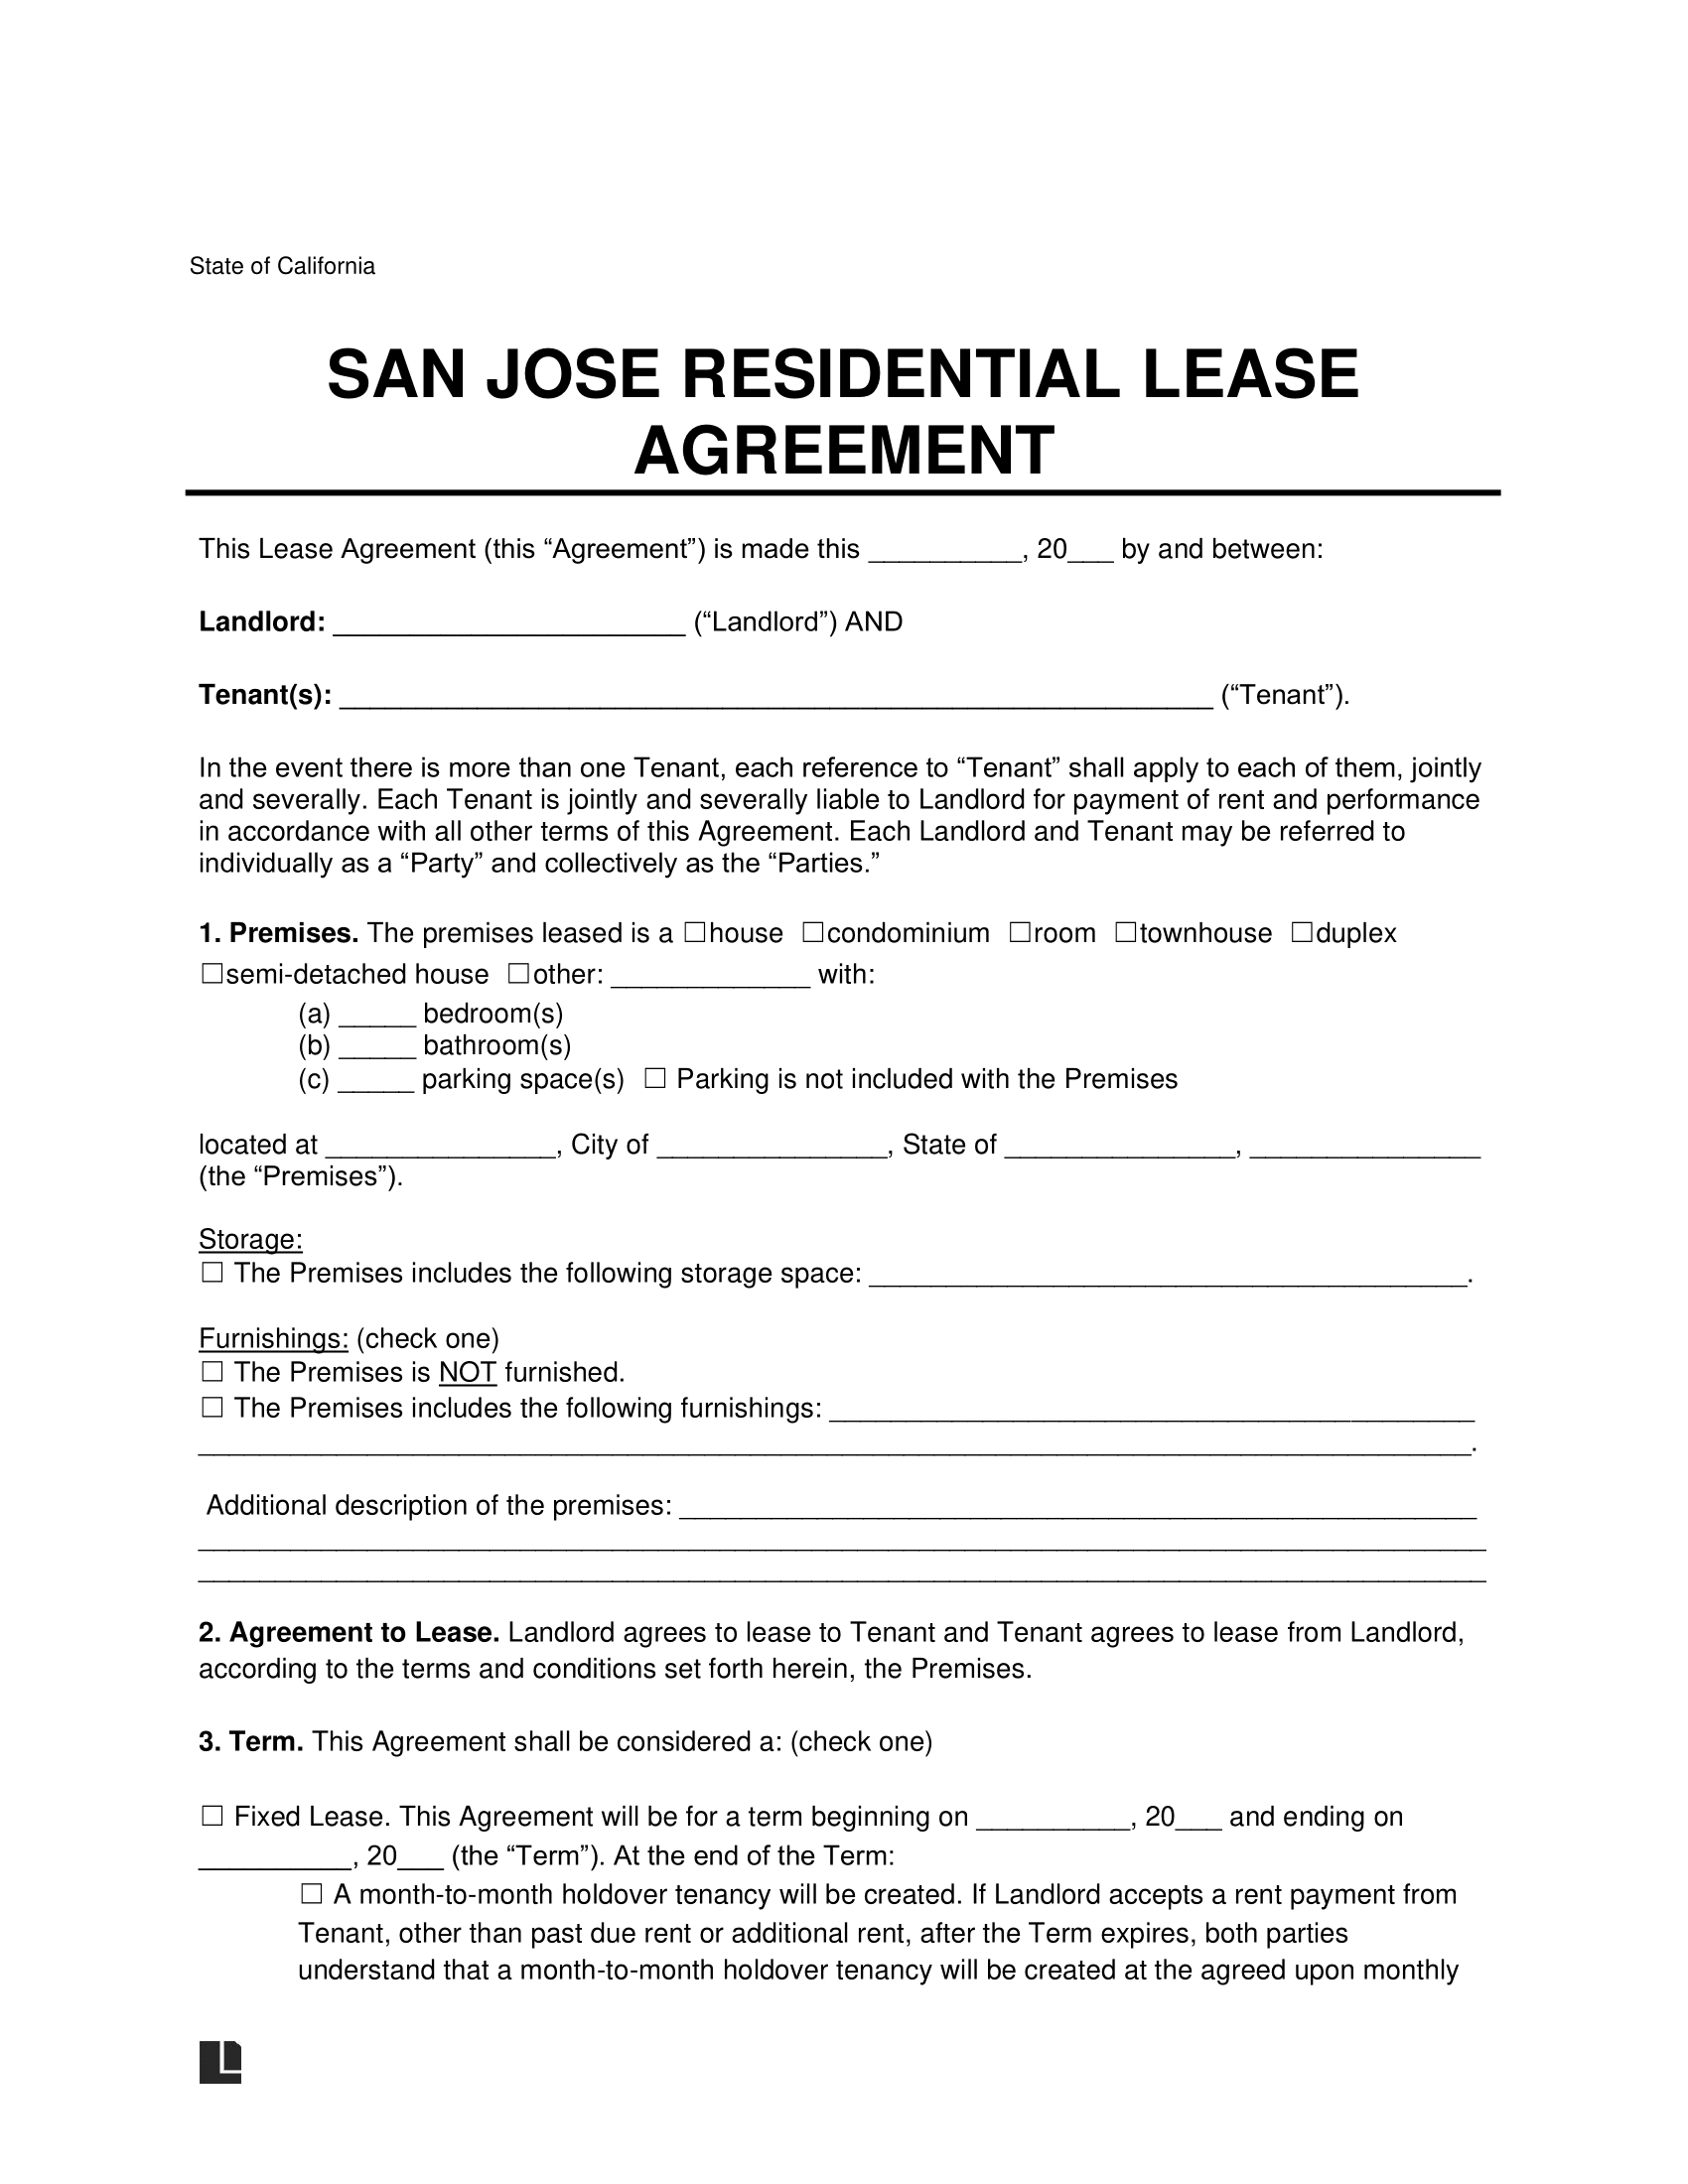 San Jose Residential Lease Agreement Template